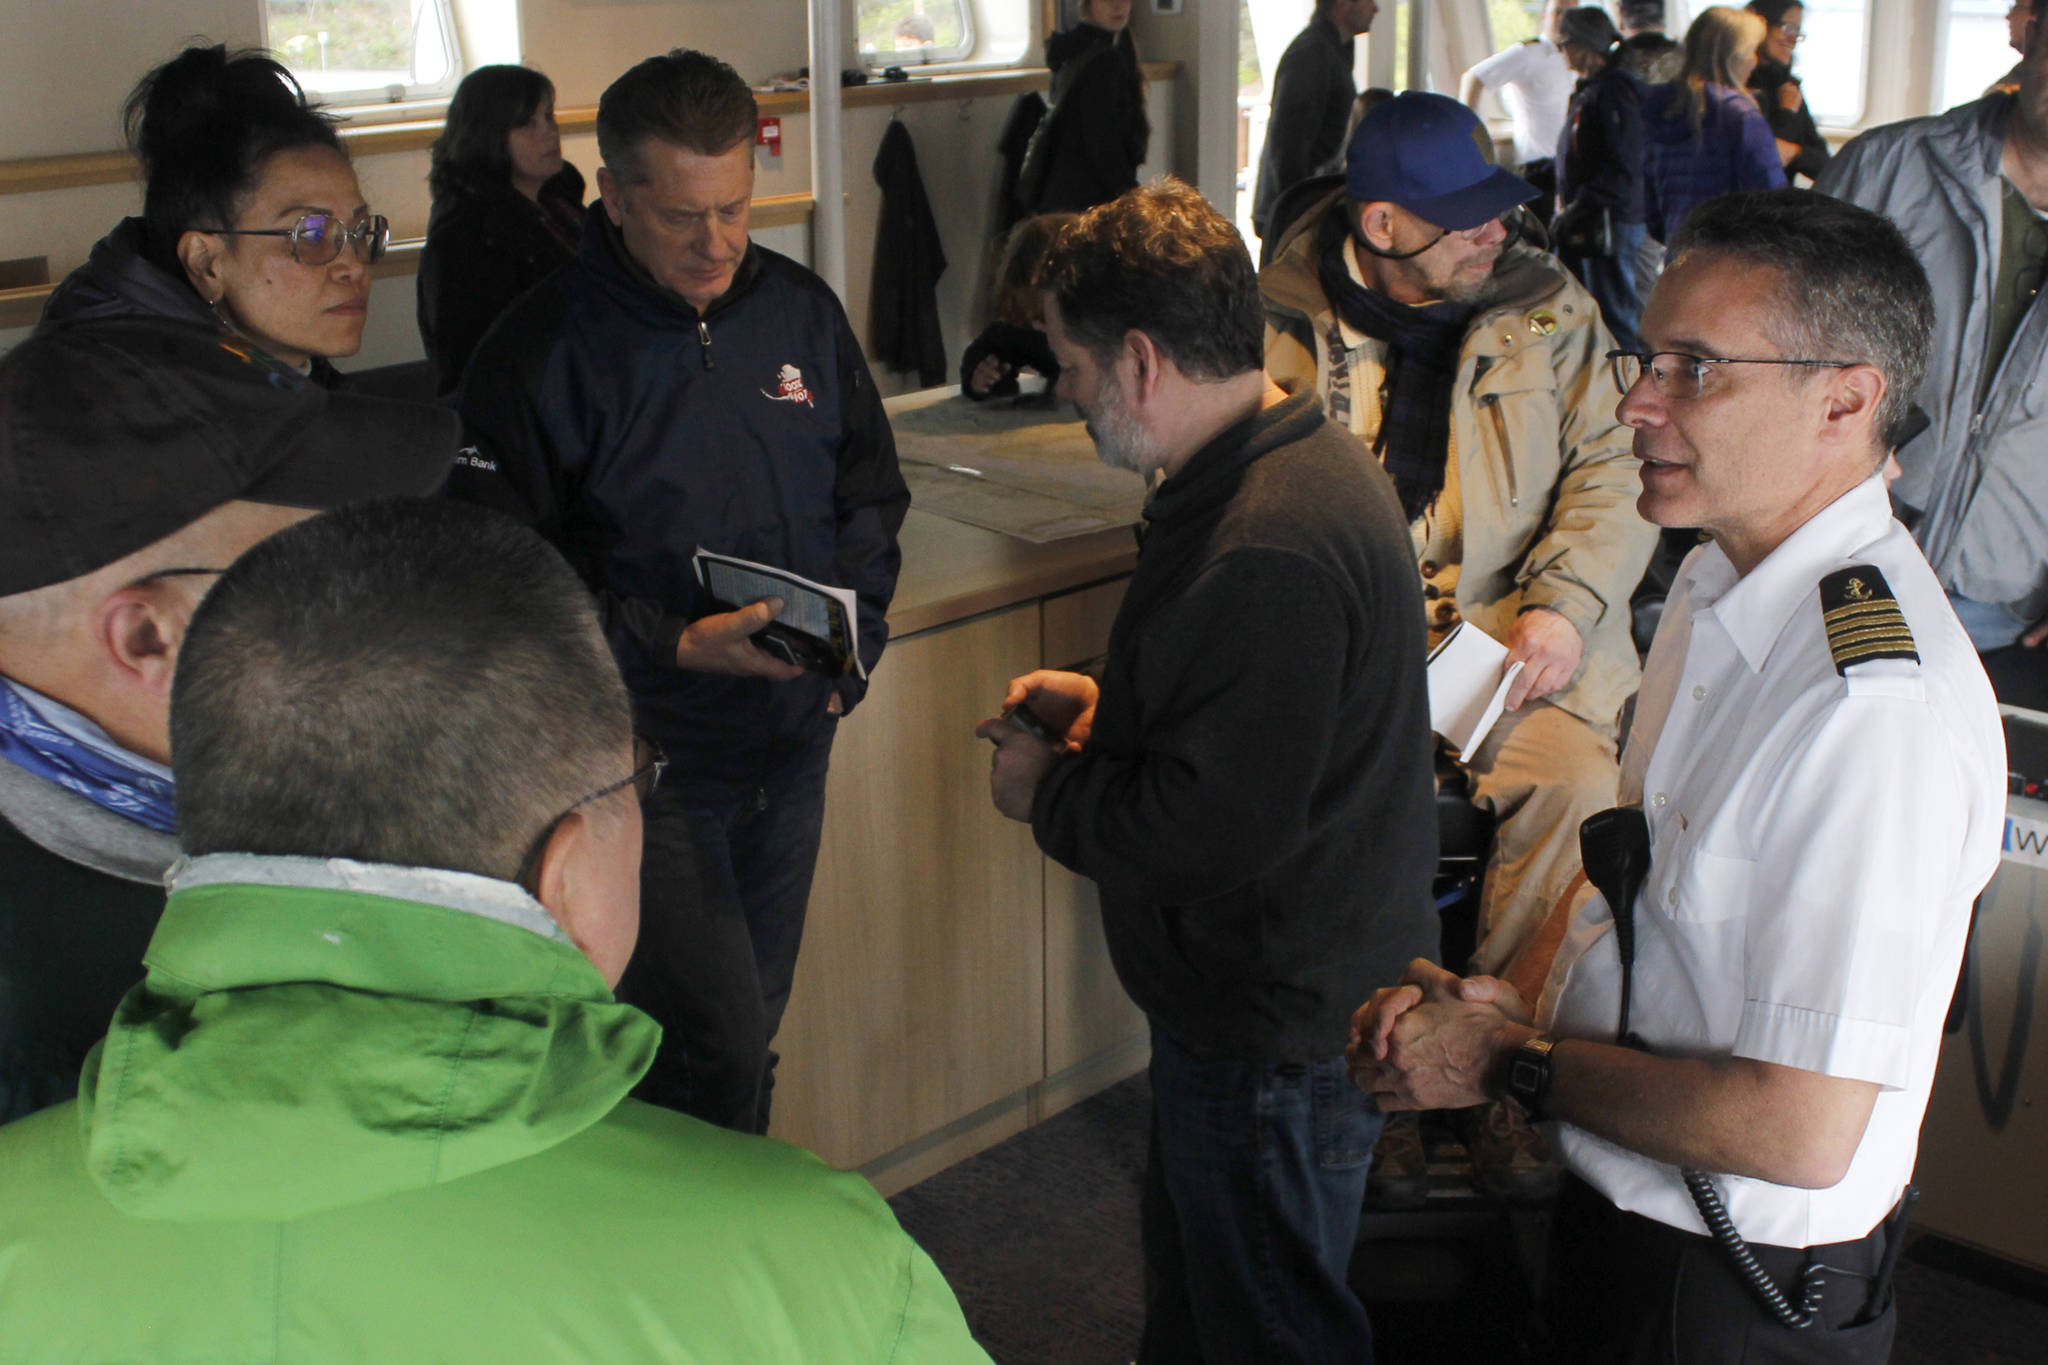 Capt. Michael Schlechter, right, speaks with members of the public on the ferry Tazlina on Sunday, May 5, 2019. (Alex McCarthy | Juneau Empire)